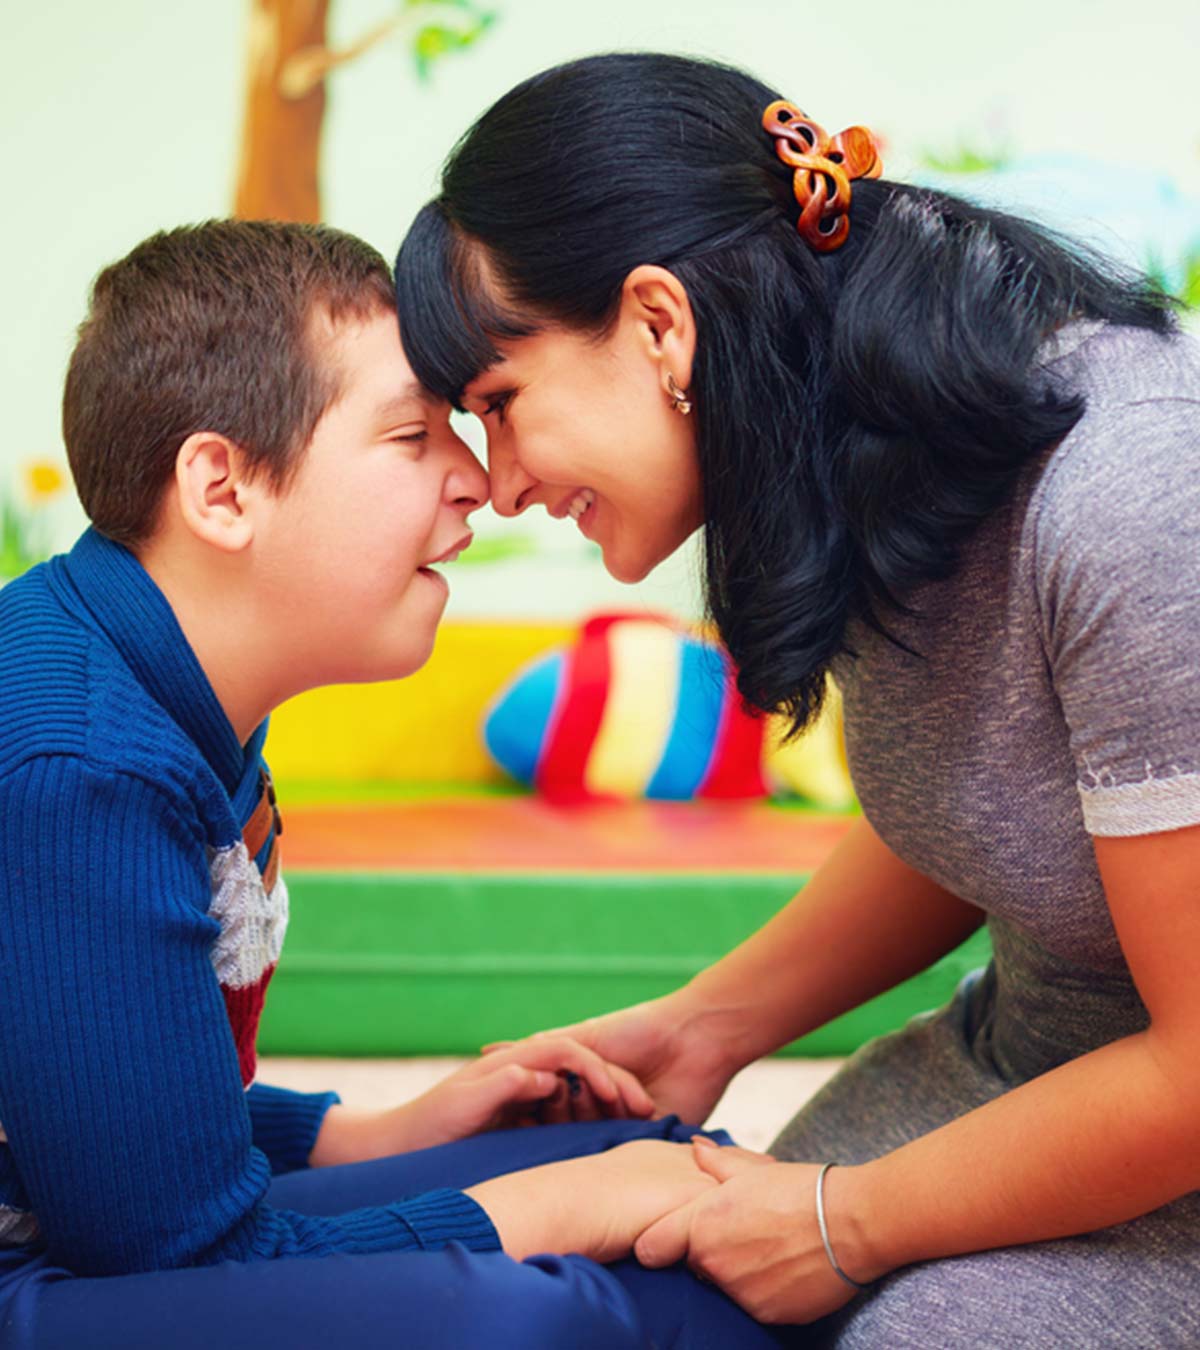 Helpful Tips For Parenting Children With Special Needs